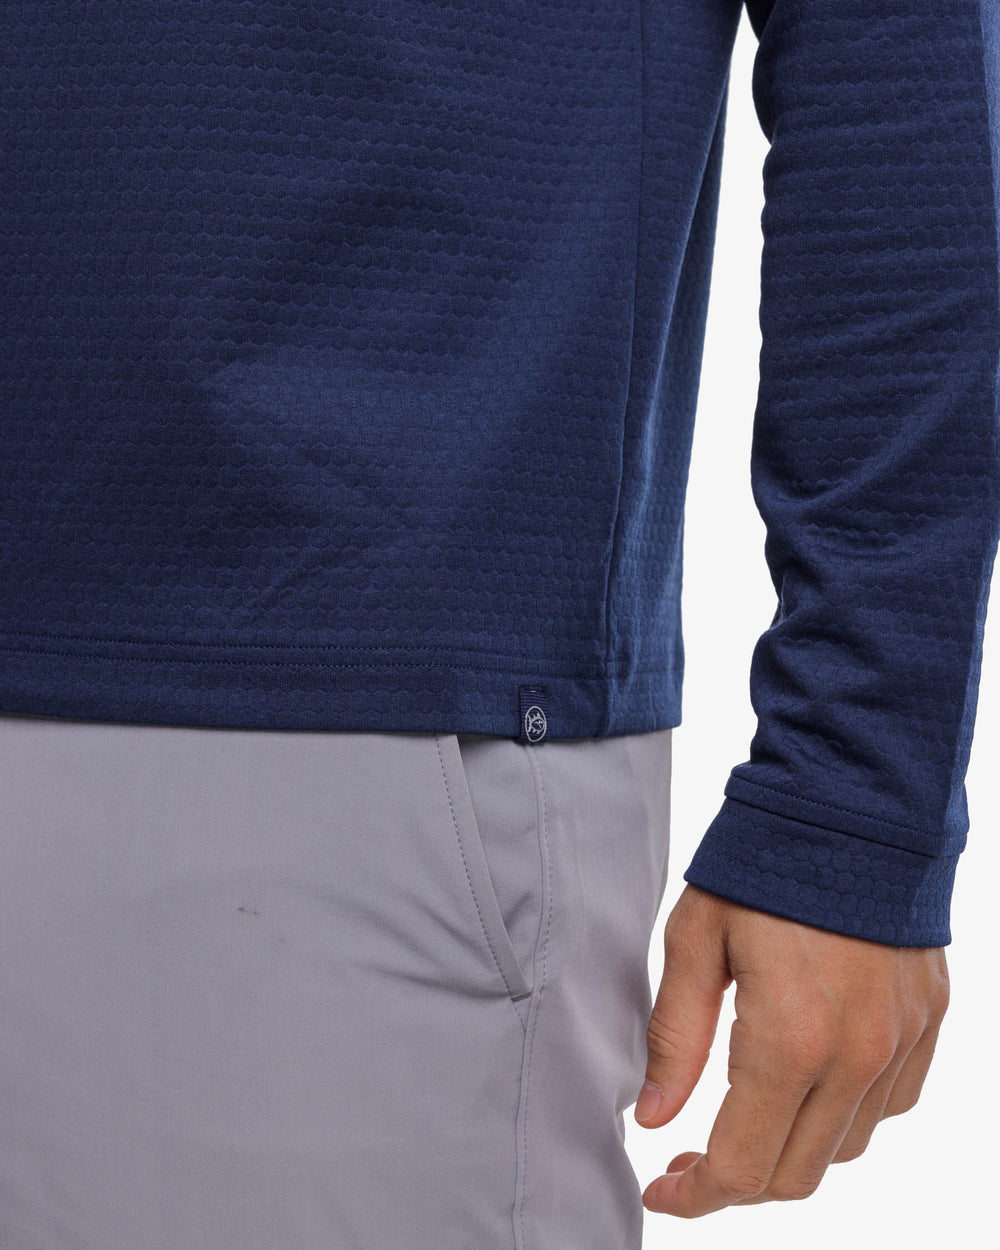 The label detail view of the Southern Tide Scuttle Heather Quarter Zip Pullover by Southern Tide - Heather True Navy